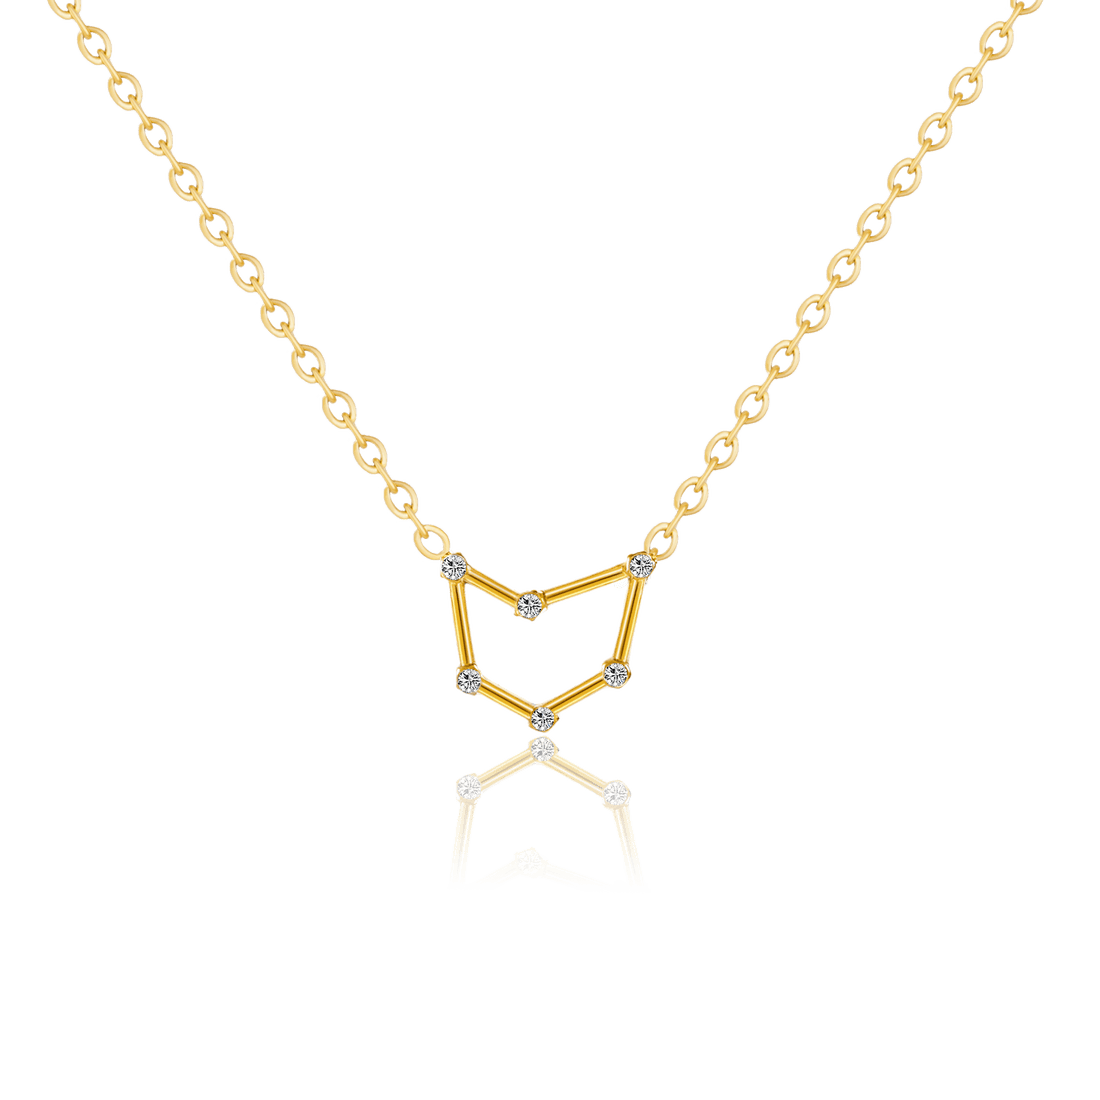 bianco rosso Necklaces Capricorn Zircon Gold Necklace cyprus greece jewelry gift free shipping europe worldwide